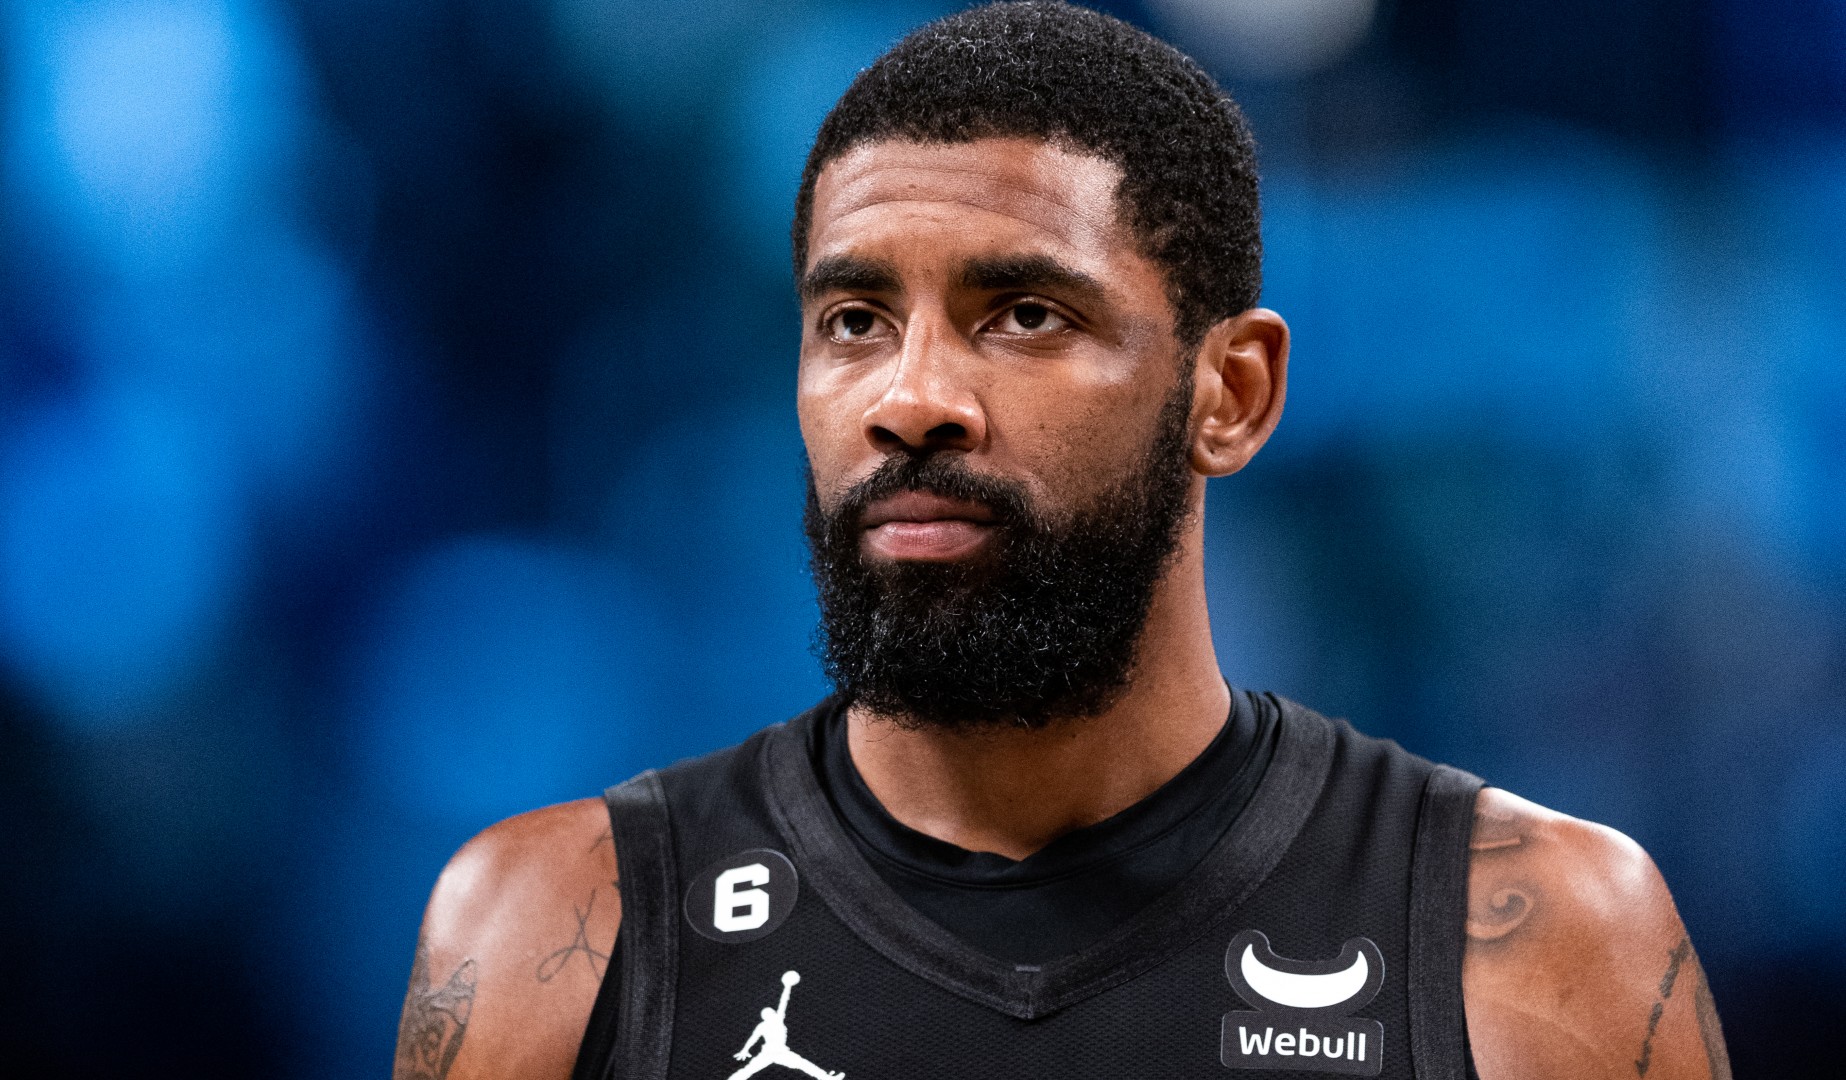 Video: Kyrie Irving issues apology following suspension by team